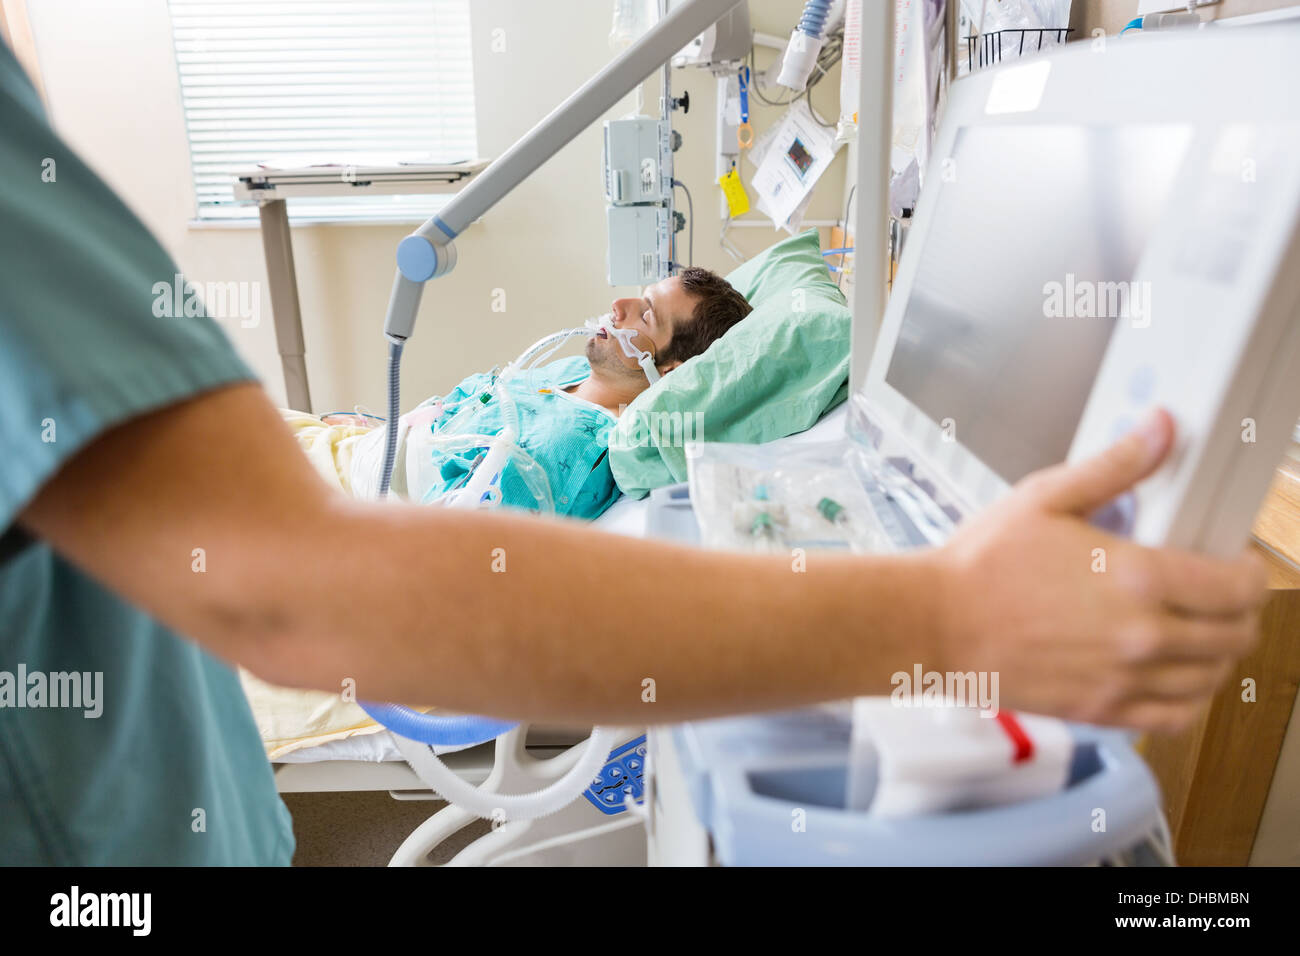 Nurse Pressing Monitor's Button With Patient Lying On Bed Stock Photo